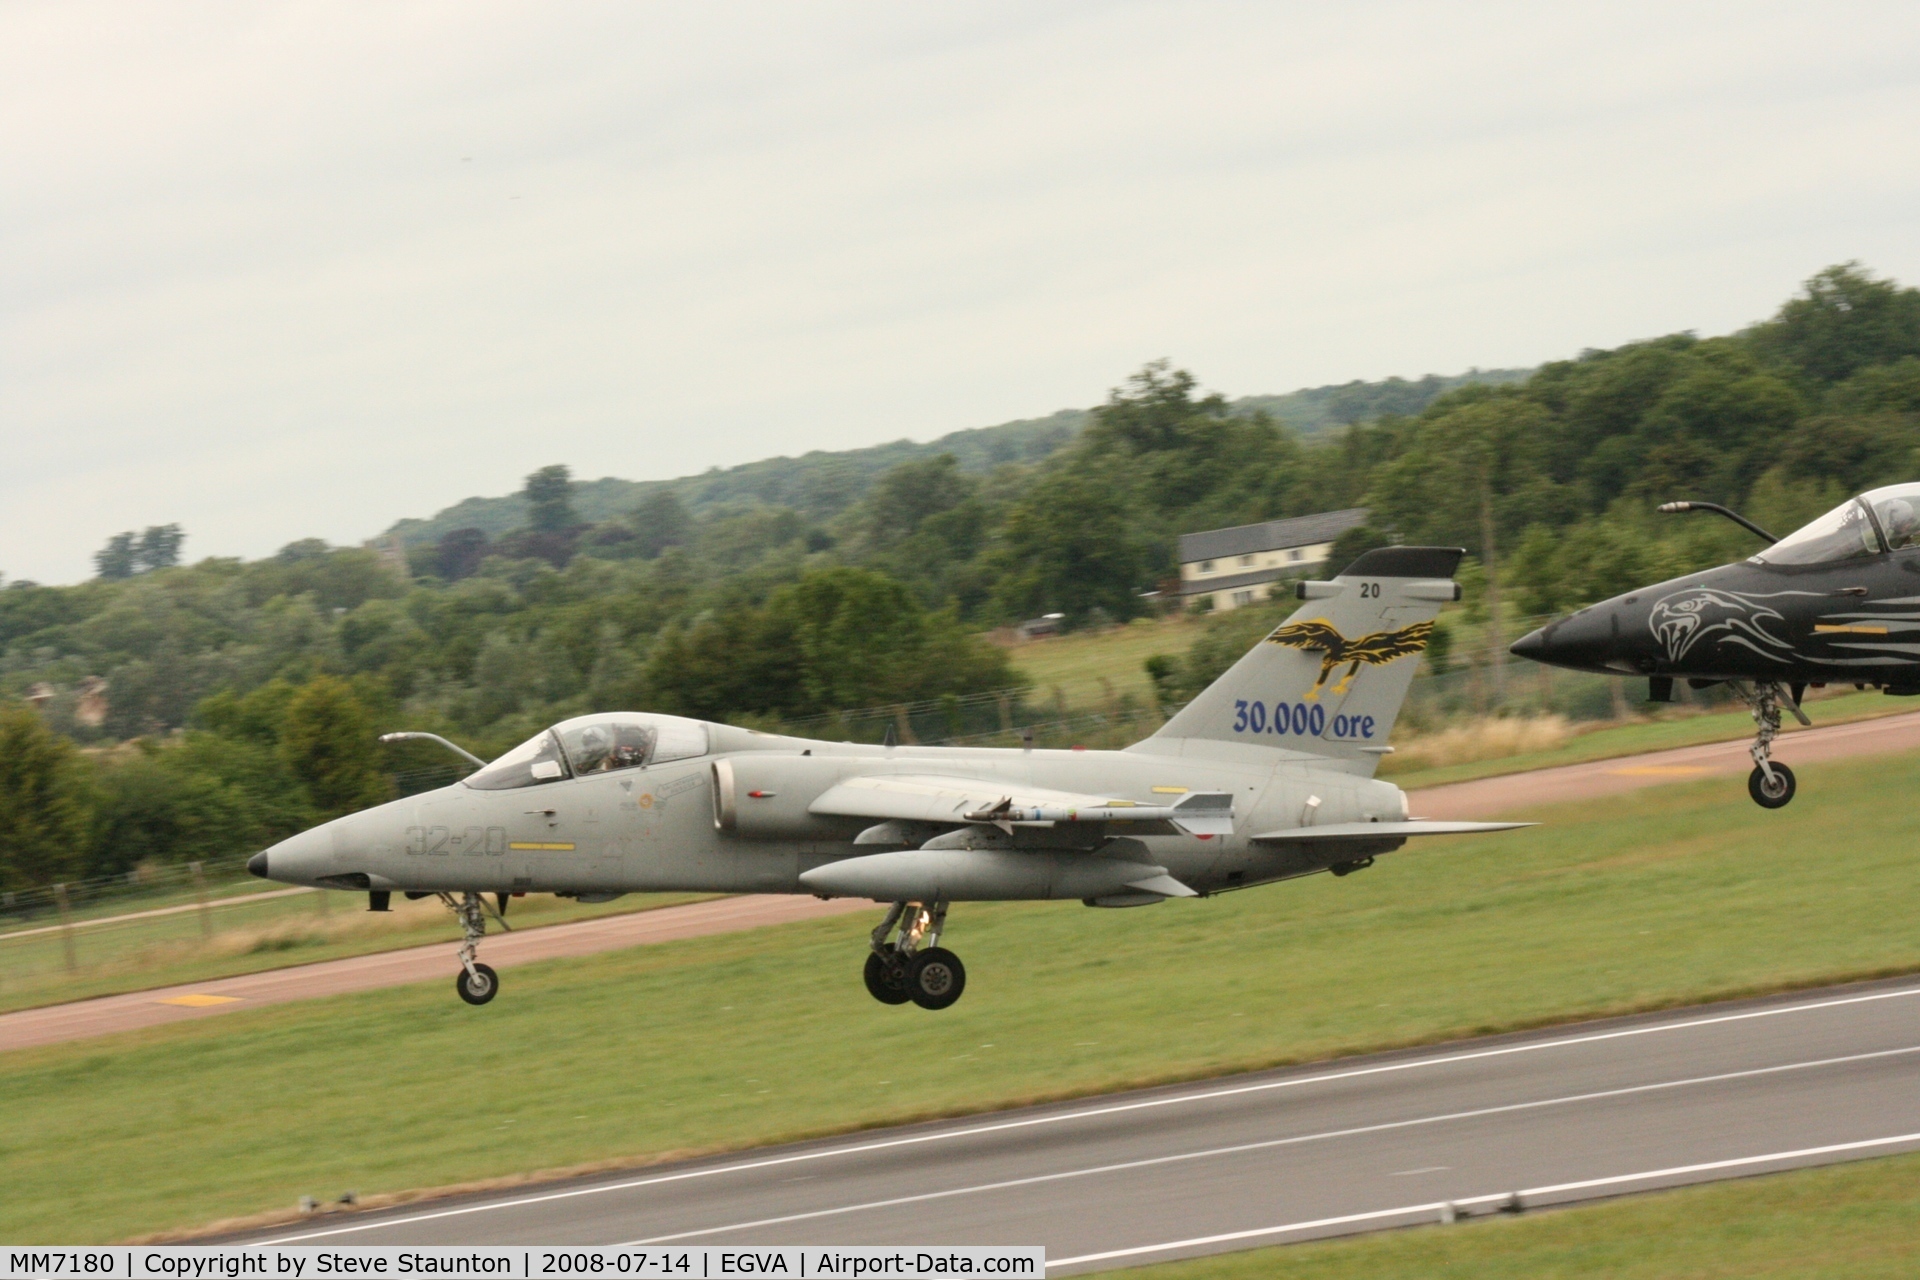 MM7180, AMX International AMX C/N IX092, Taken at the Royal International Air Tattoo 2008 during arrivals and departures (show days cancelled due to bad weather)